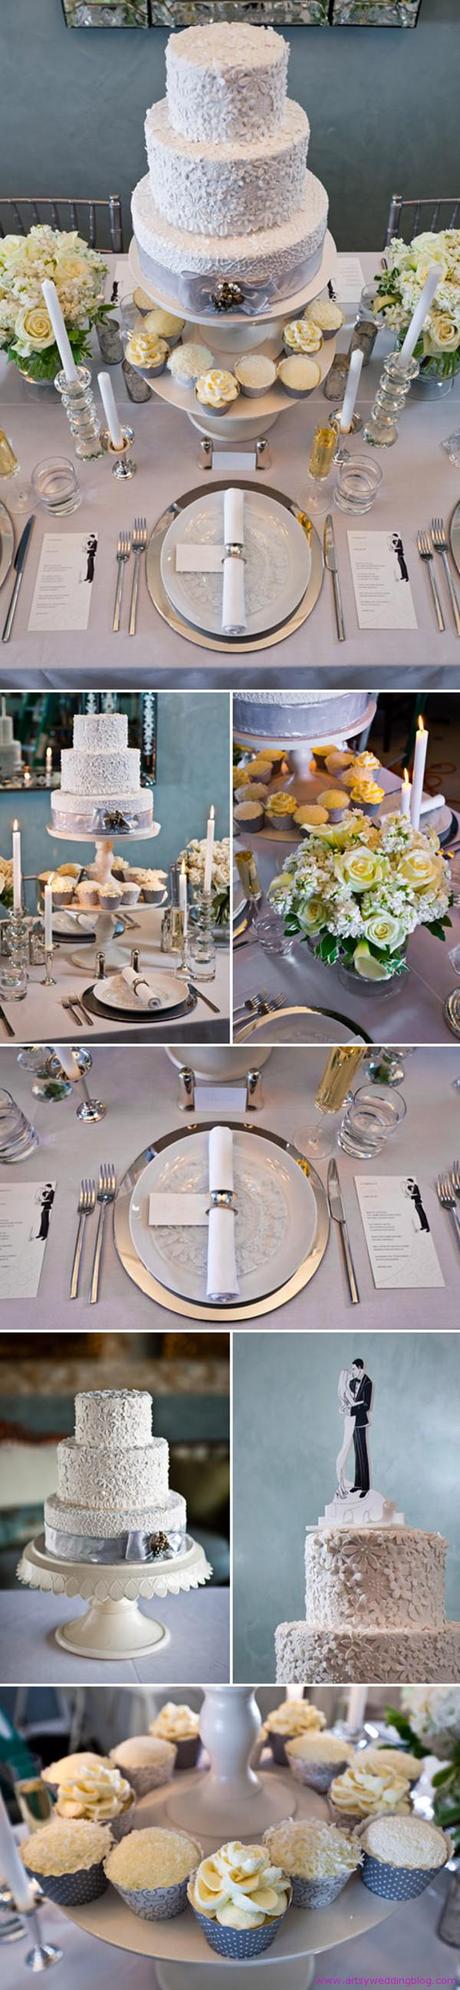 Chic Silver and White Winter Table Top Decor Ideas